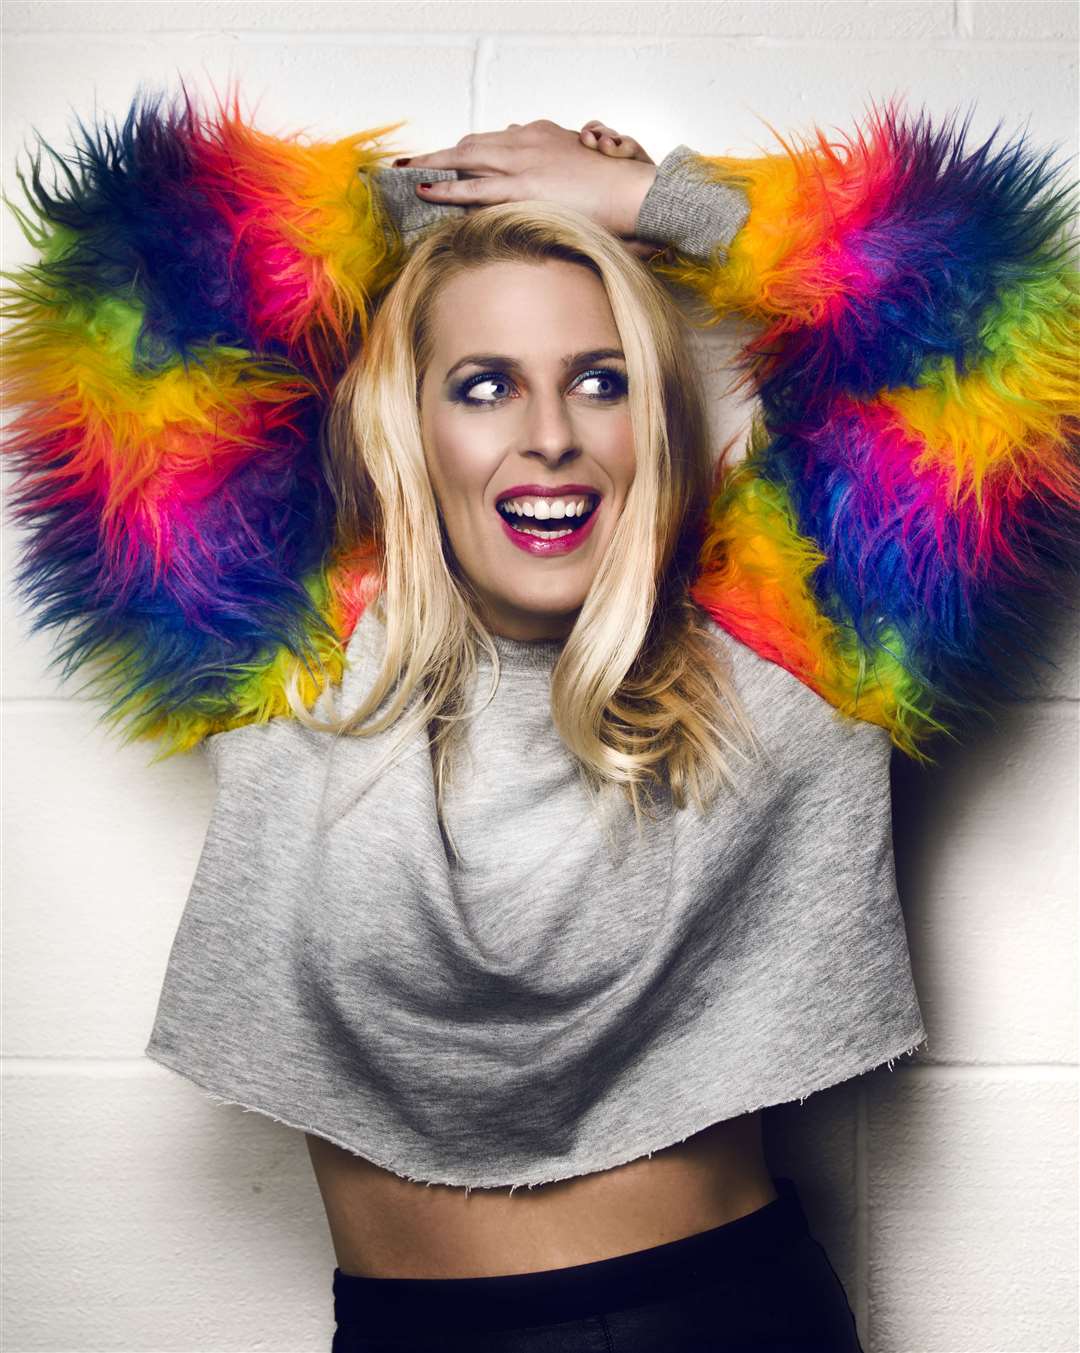 Sara Pascoe will be at the Stag Theatre